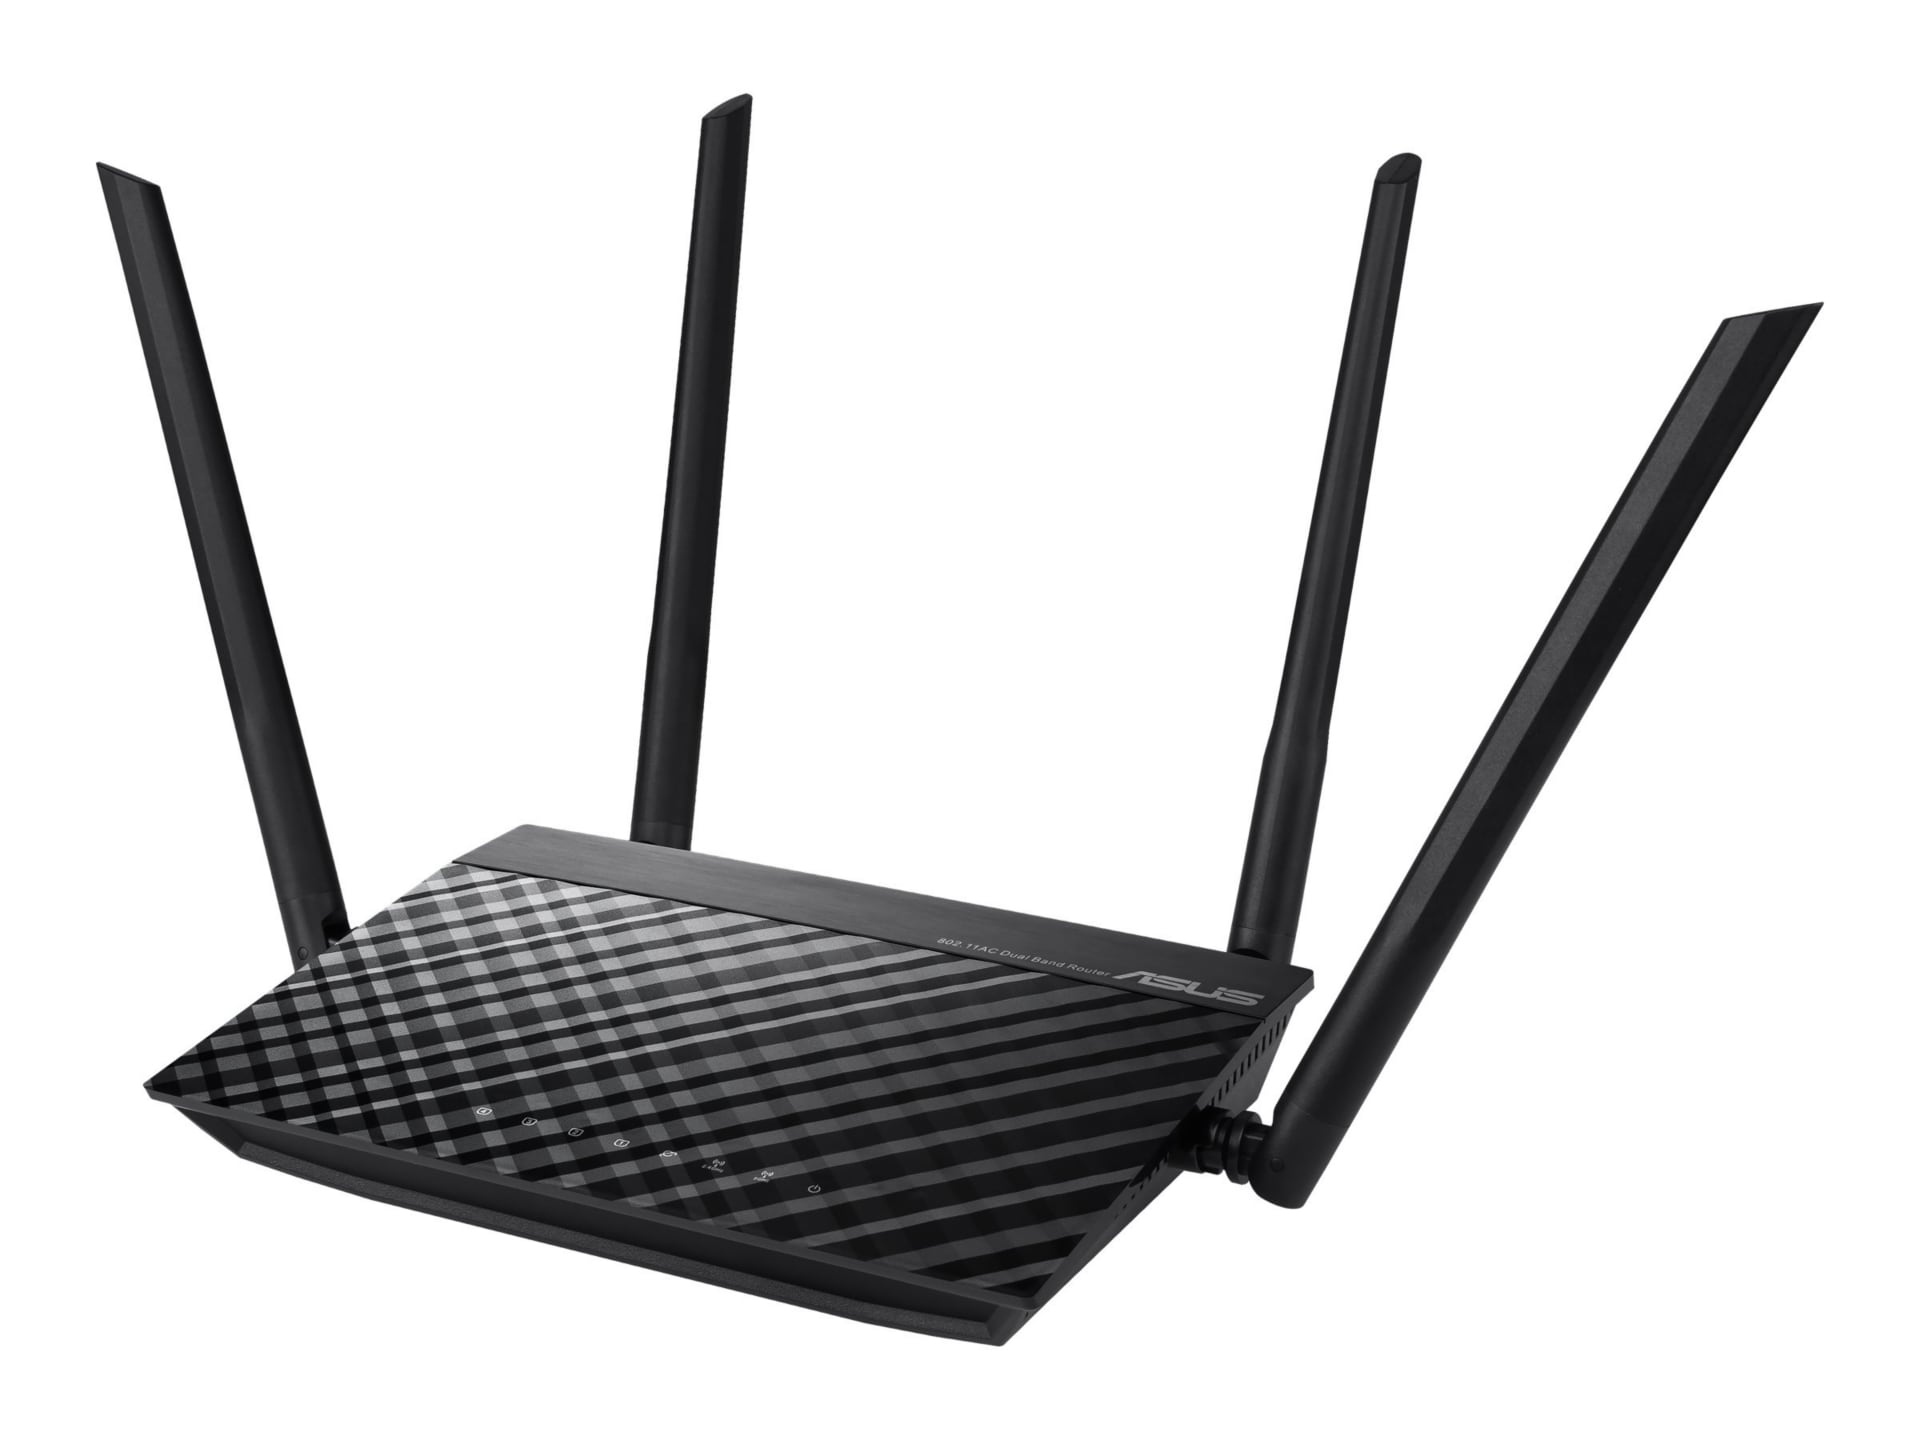 ASUS RT-AC1200 V2 - wireless router - Wi-Fi 5 - desktop